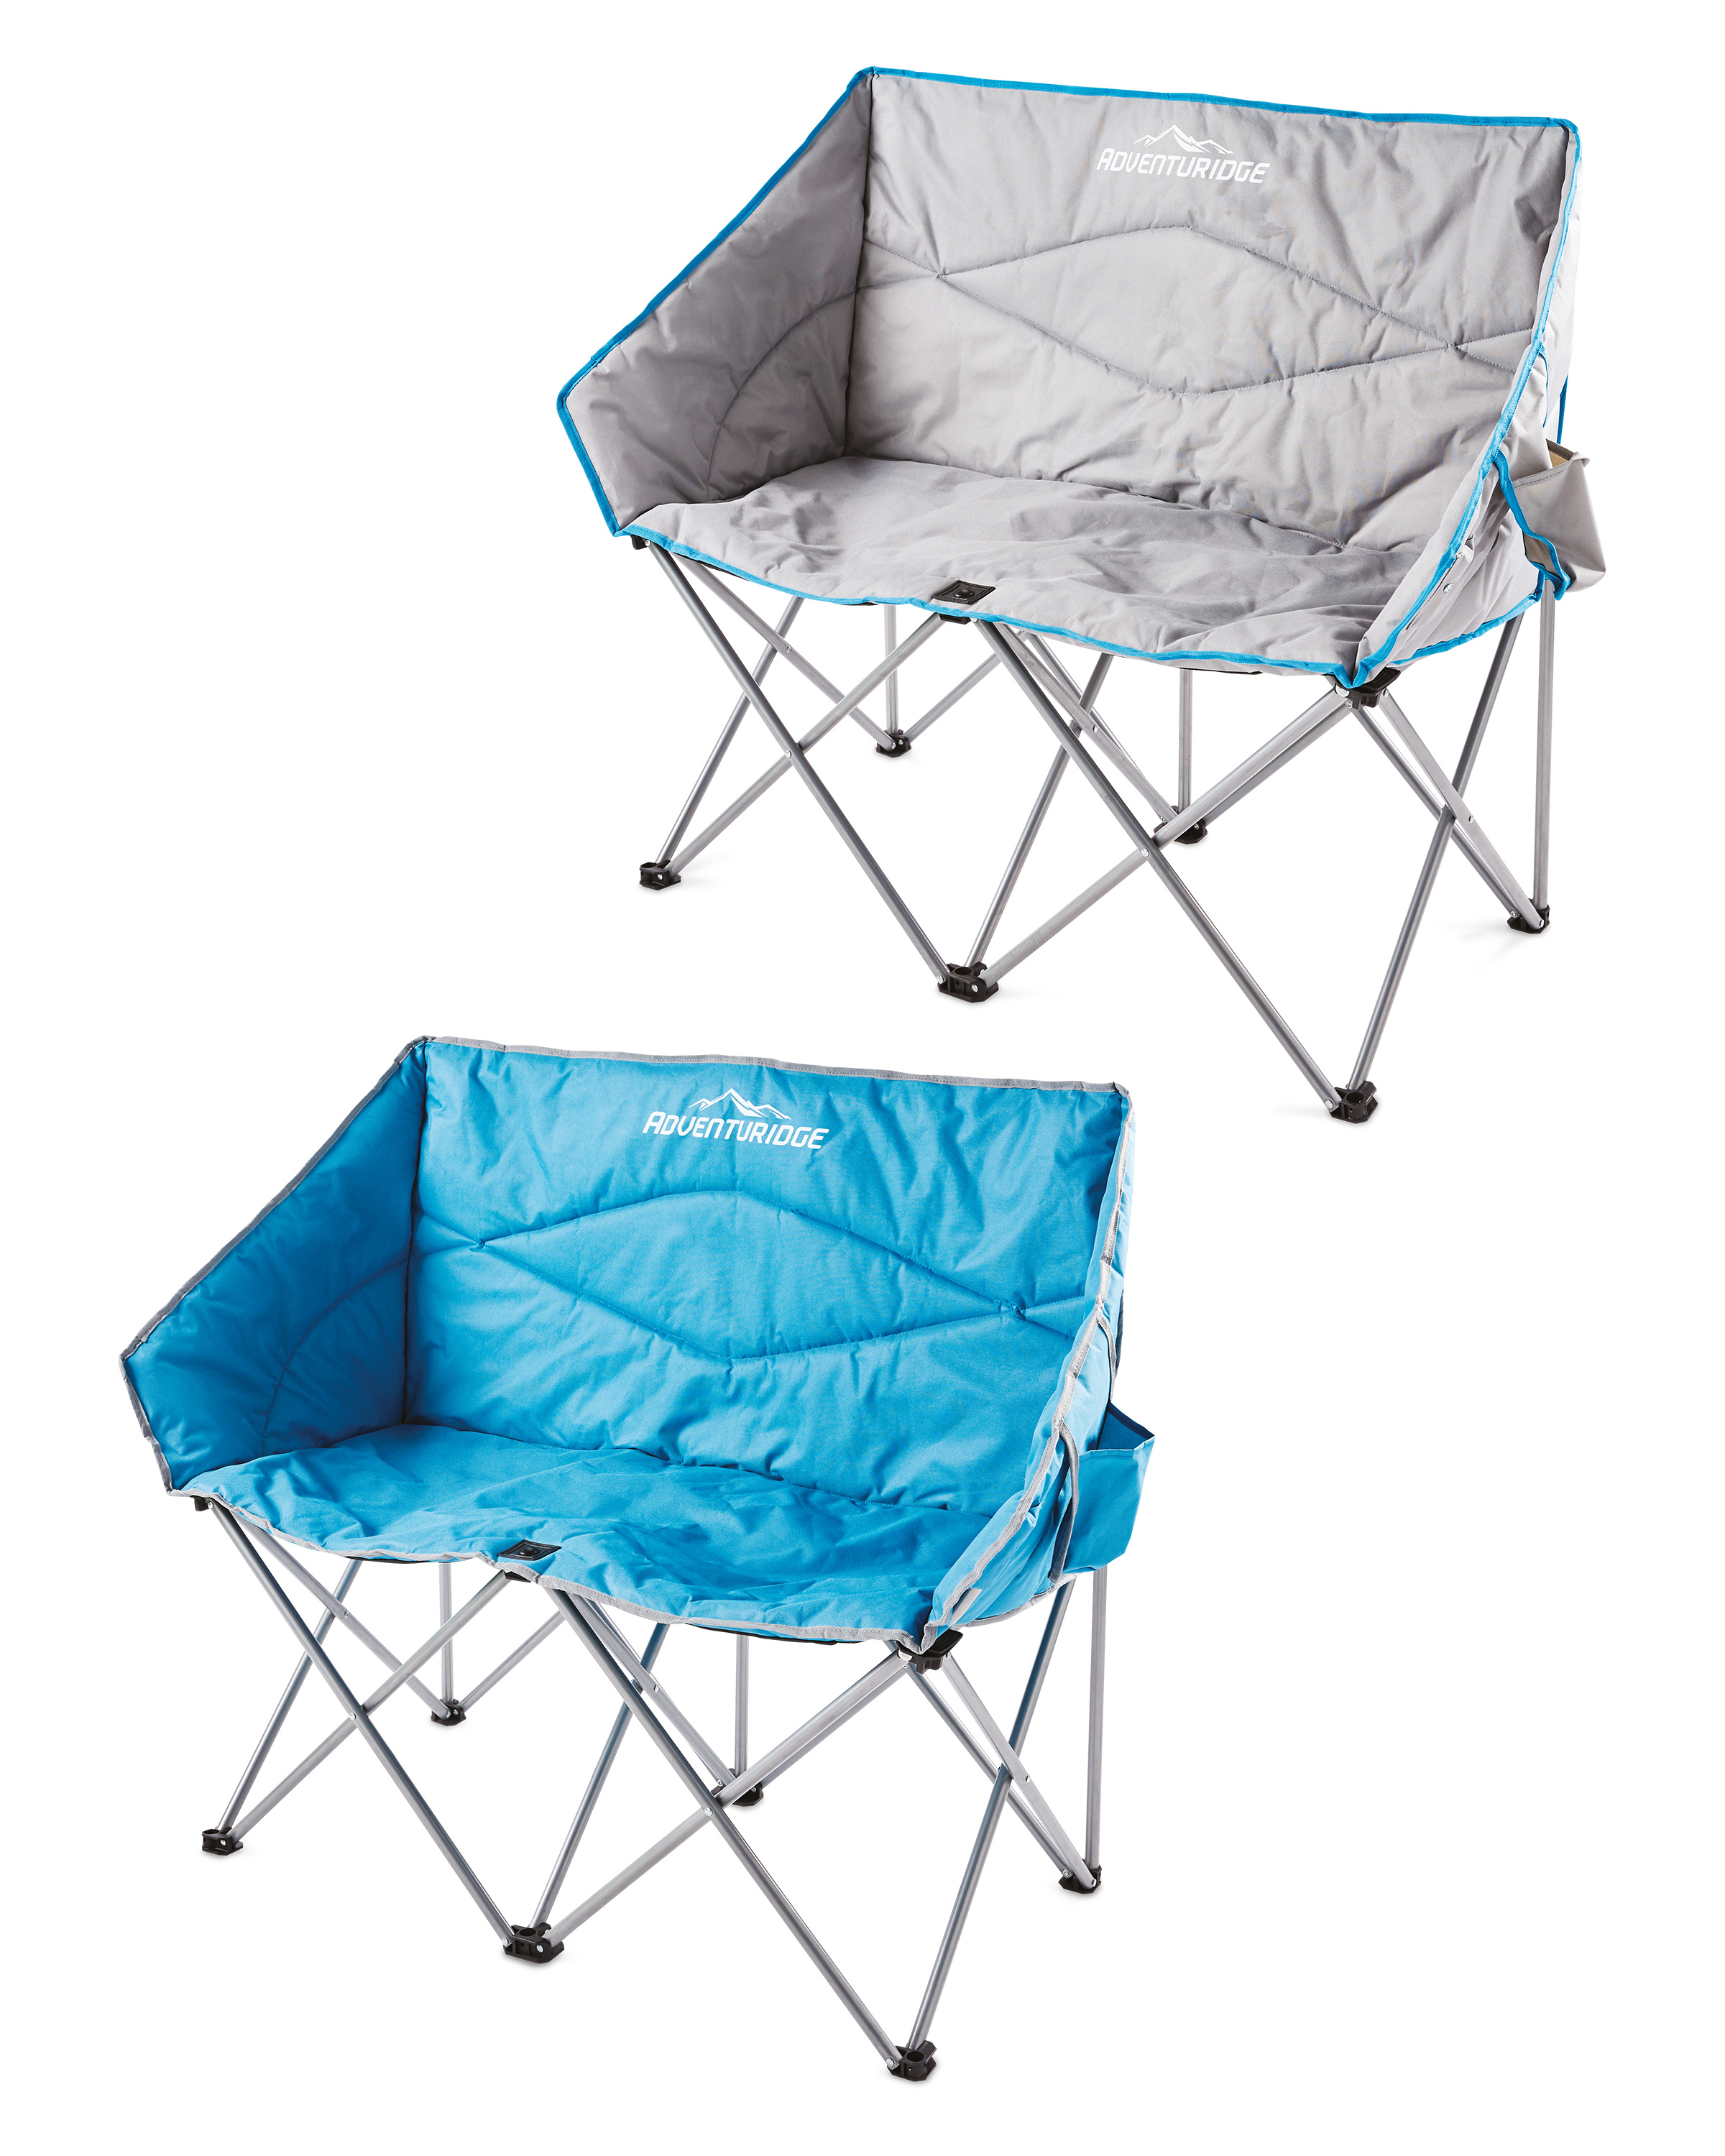 Twin Camping Chair Aldi Uk, Double Camping Chairs Uk